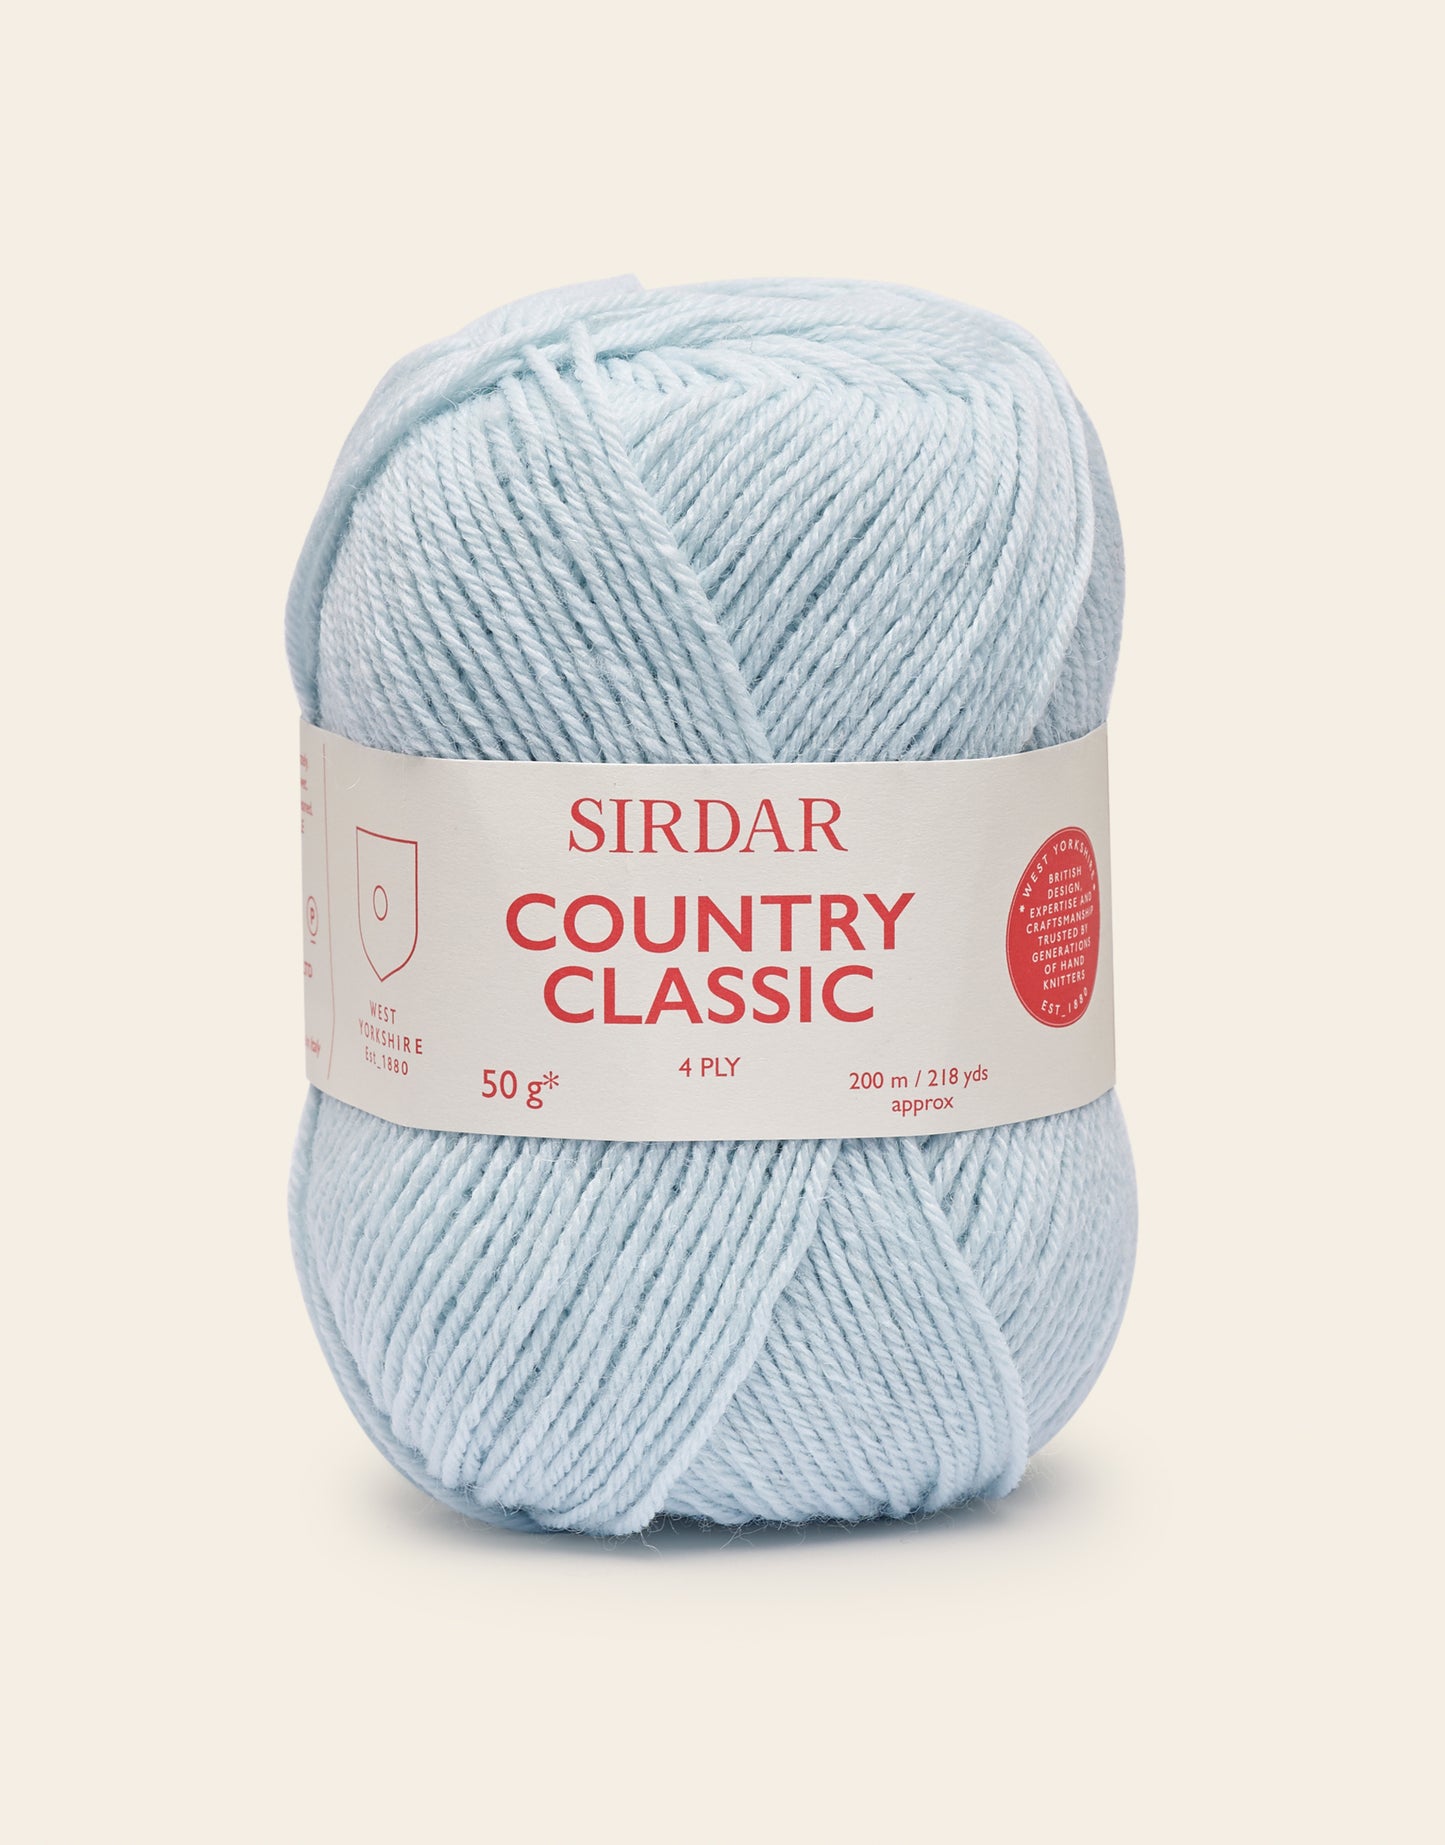 Sirdar Country Classic 4ply 50g